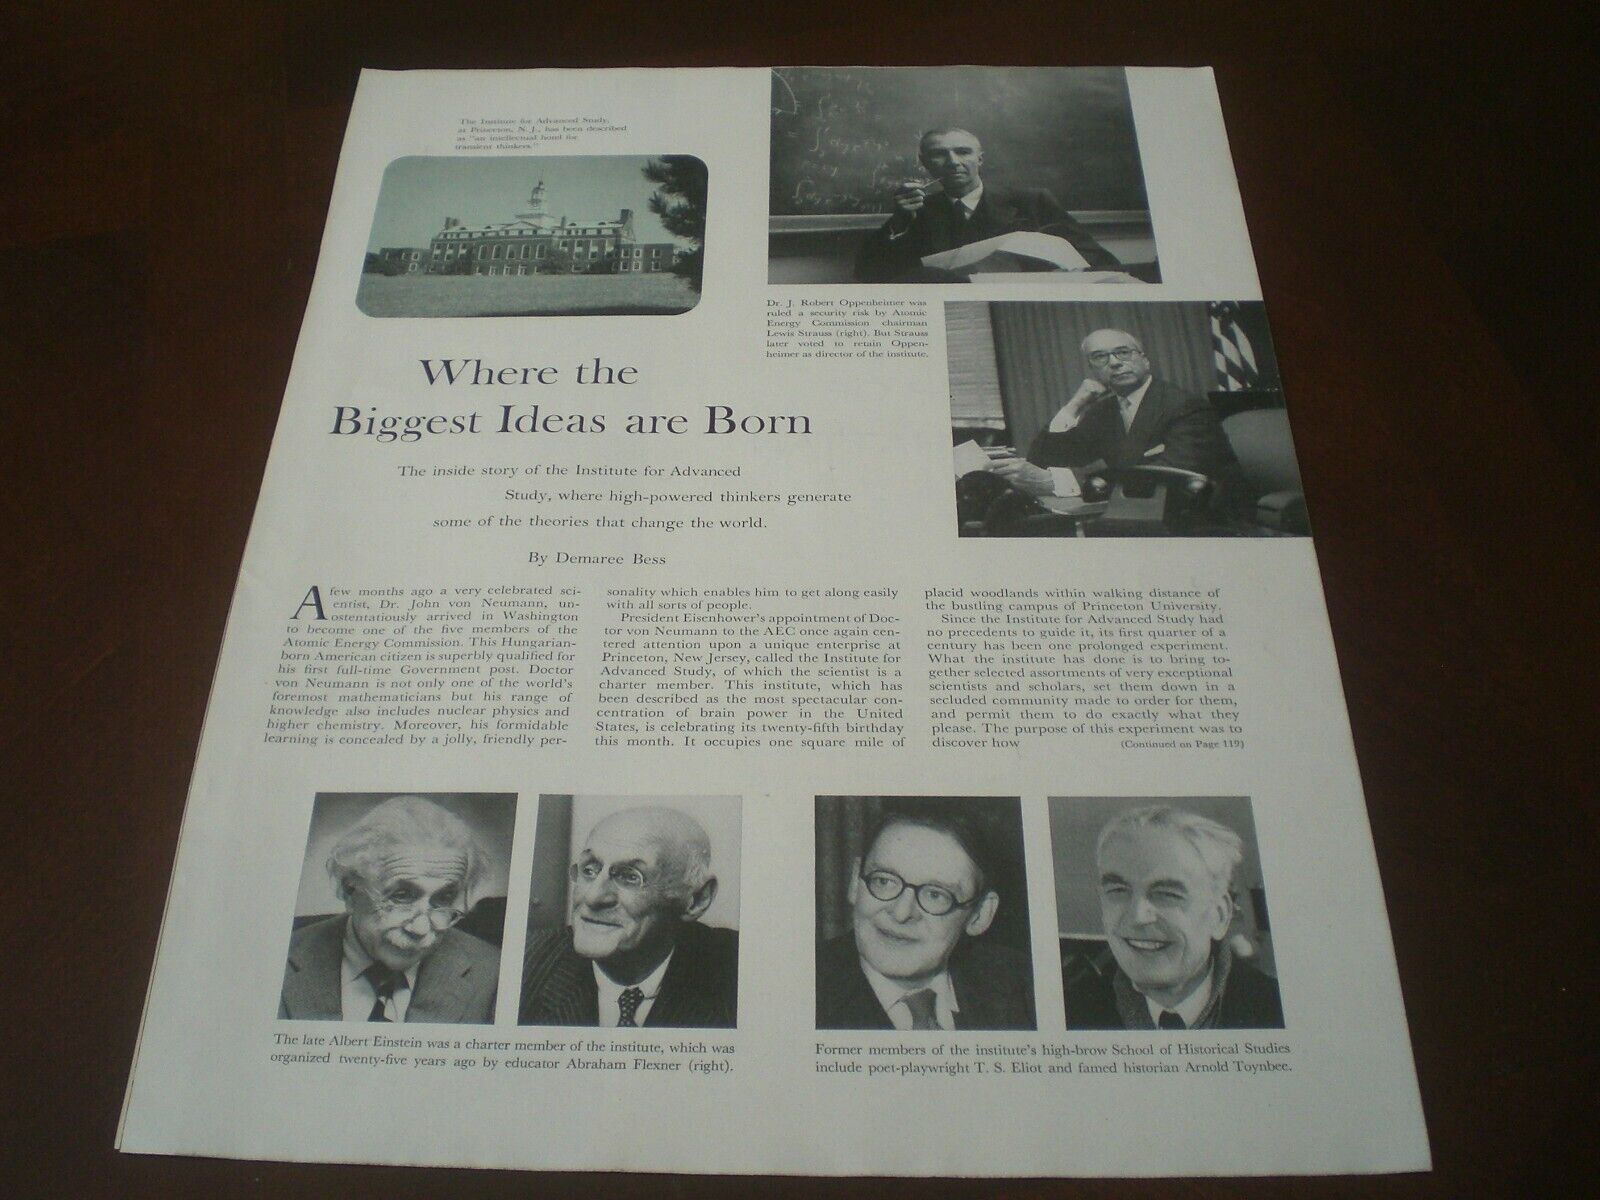 Oppenheimer - The Inside Story (Article in Sat Eve Post 10-22-55) 7 Photos